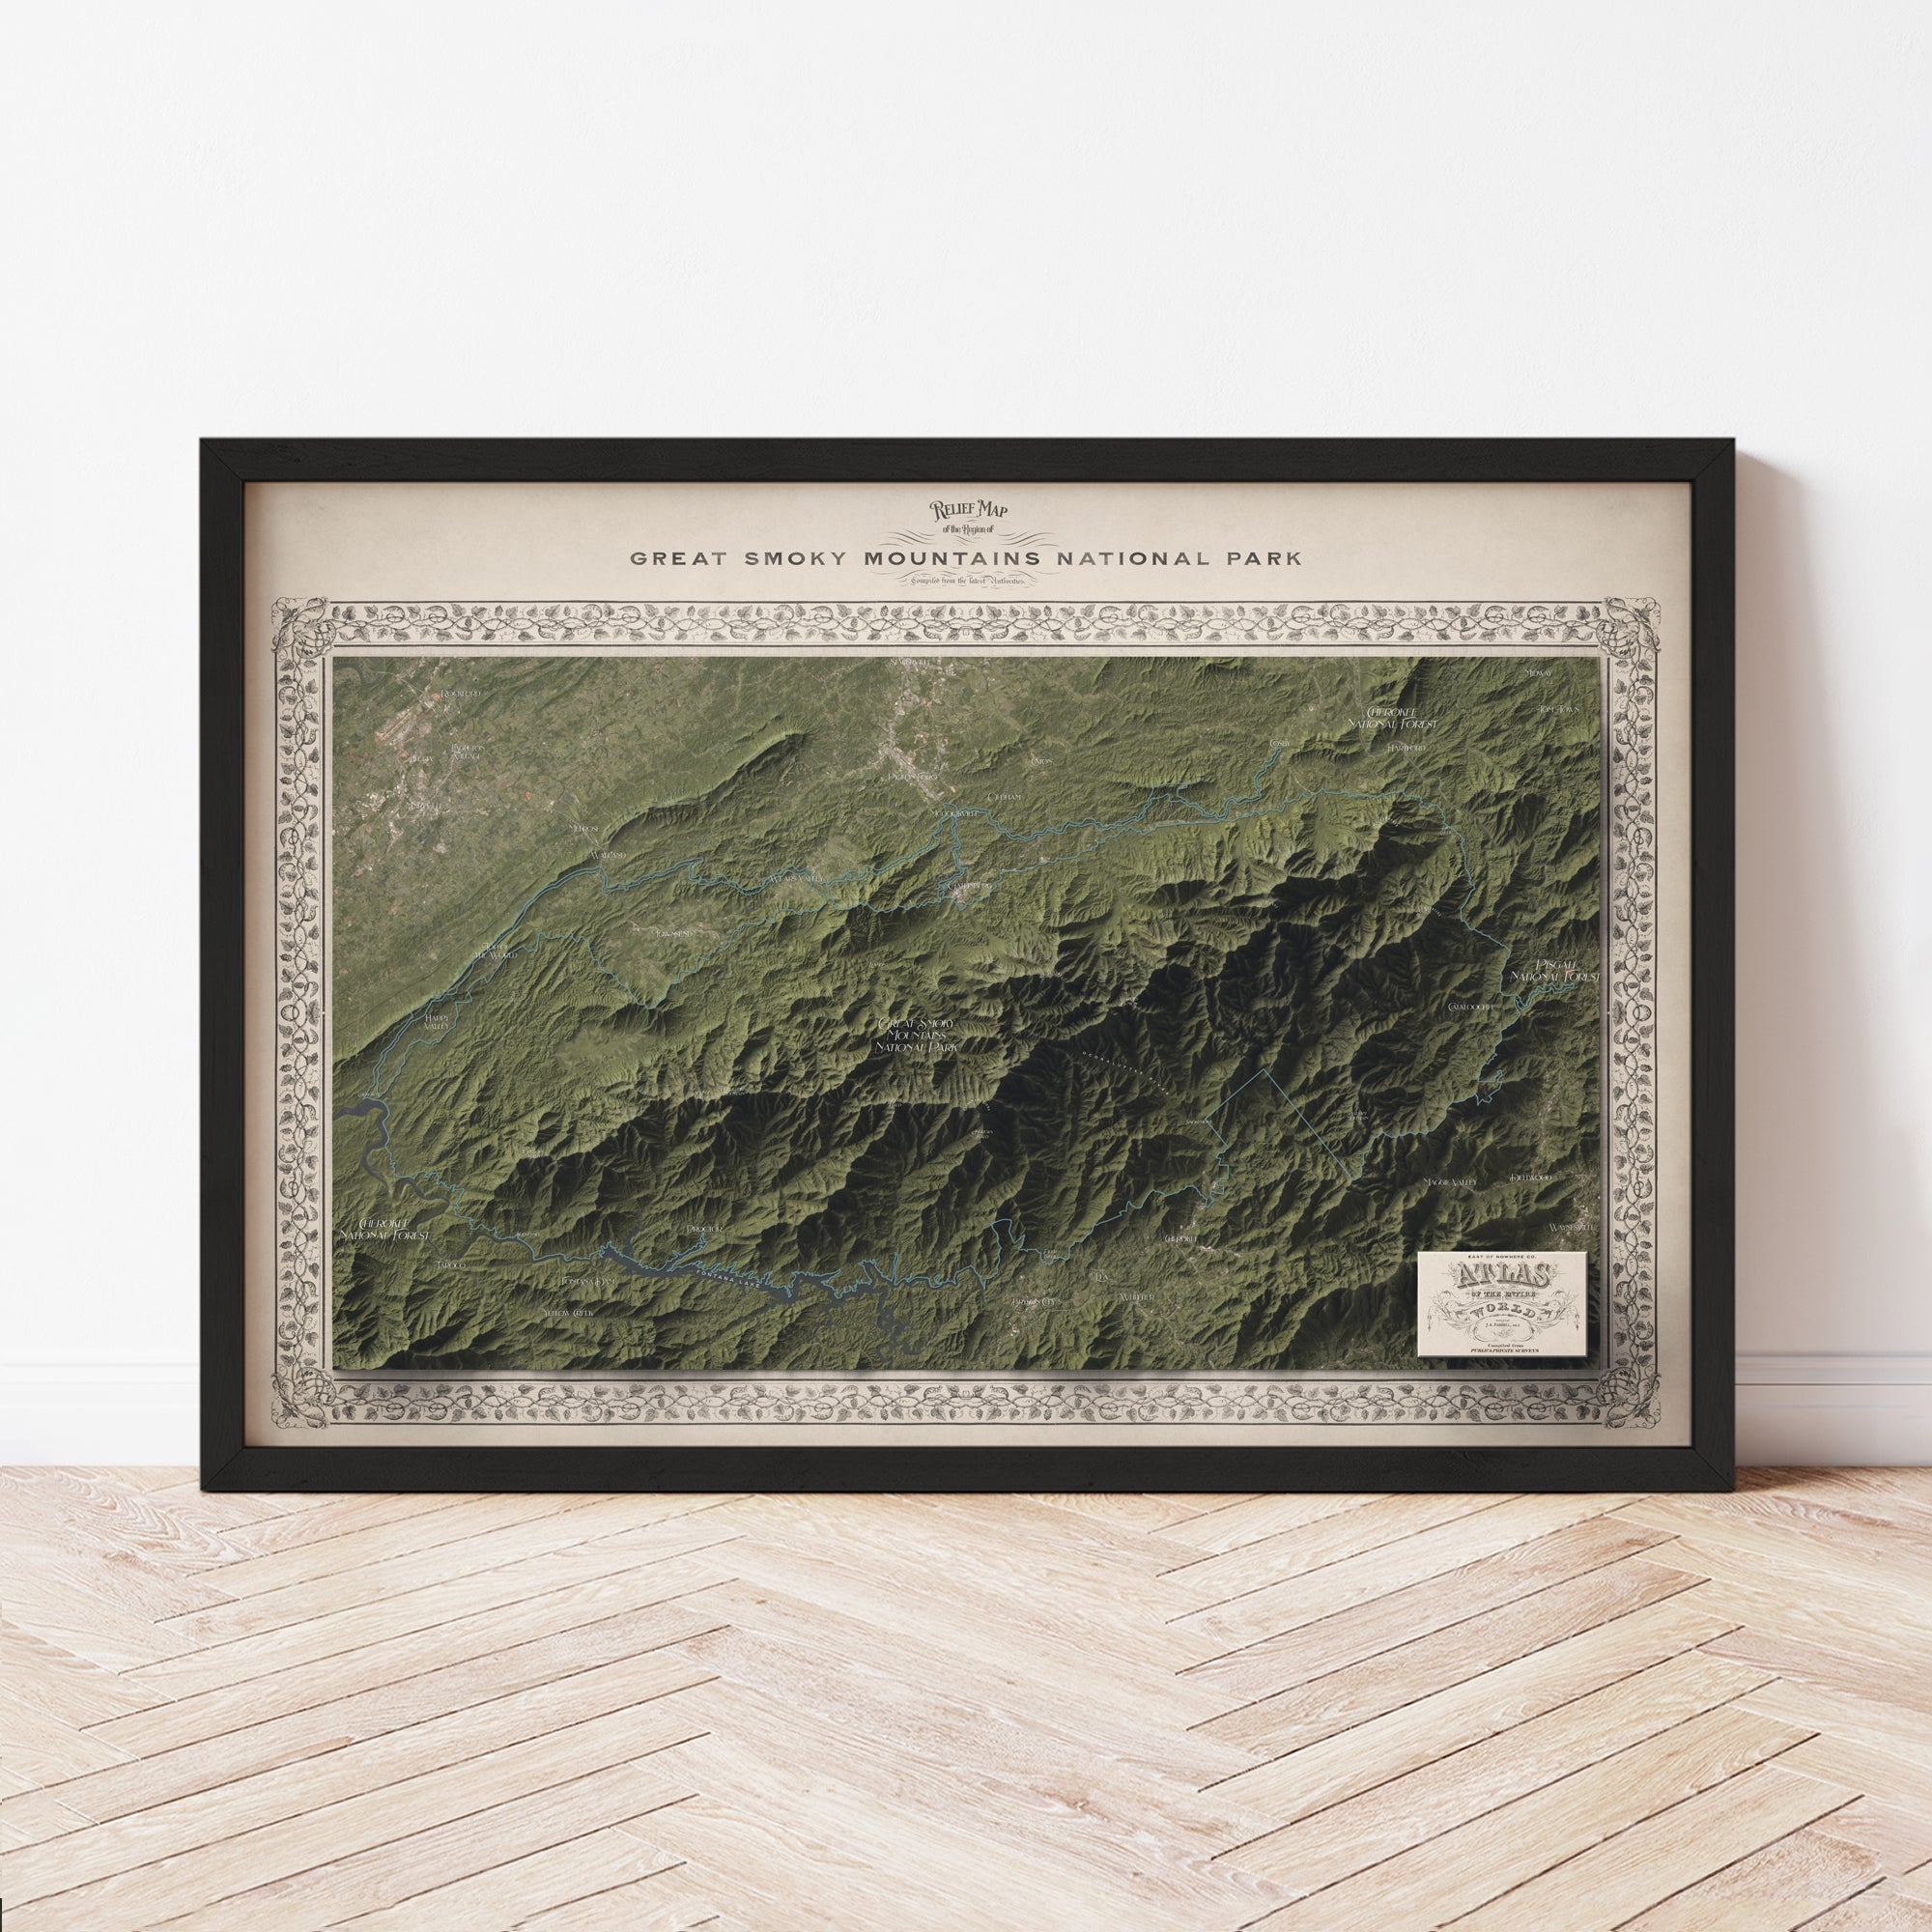 Great Smoky Mountains National Park Map - The East of Nowhere World Atlas